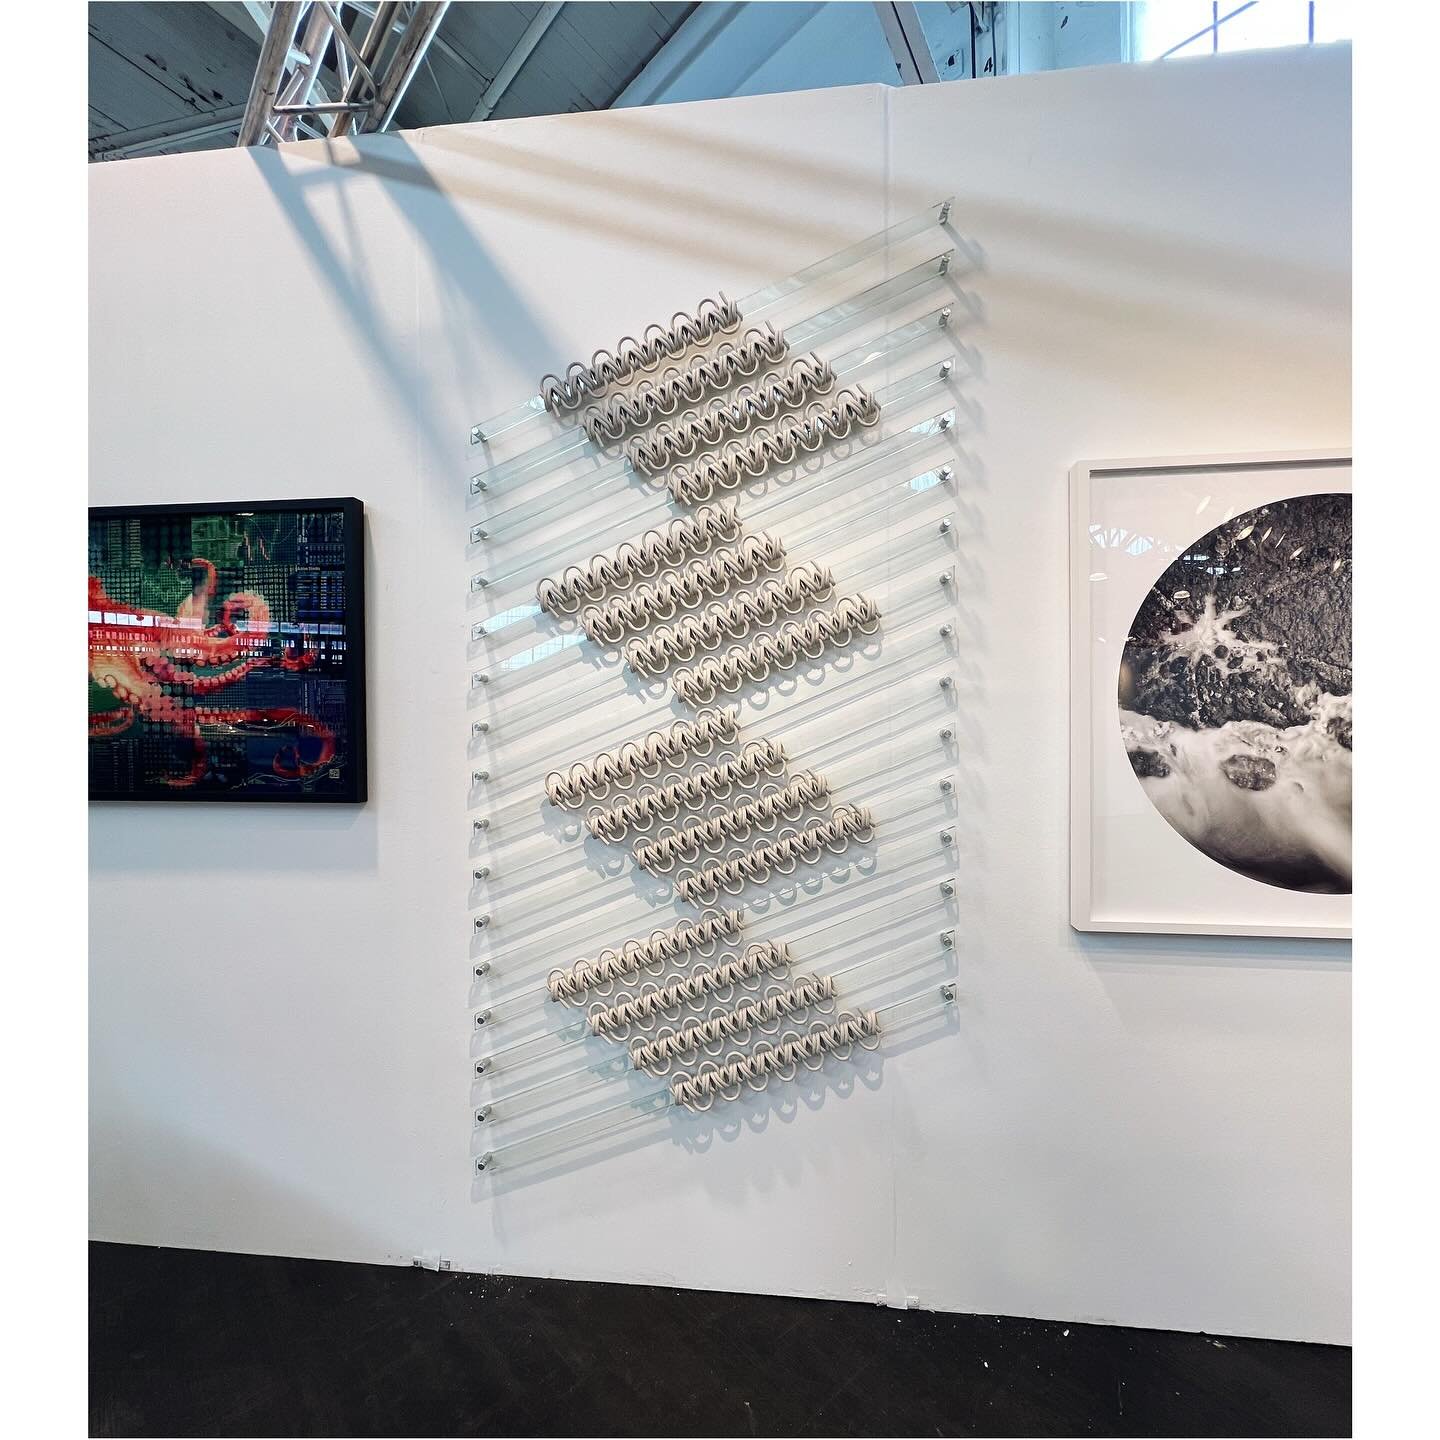 One more day (Sunday) to enjoy the San Francisco Art Fair at Ft Mason.

&ldquo;We Didn&rsquo;t Get the Memo&rdquo;
Group exhibition curated by Cheryl Derricotte

Hitching Post
Fire-resistant rope, flame polished acrylic, aluminum
100 x 48 x 3 in
2023